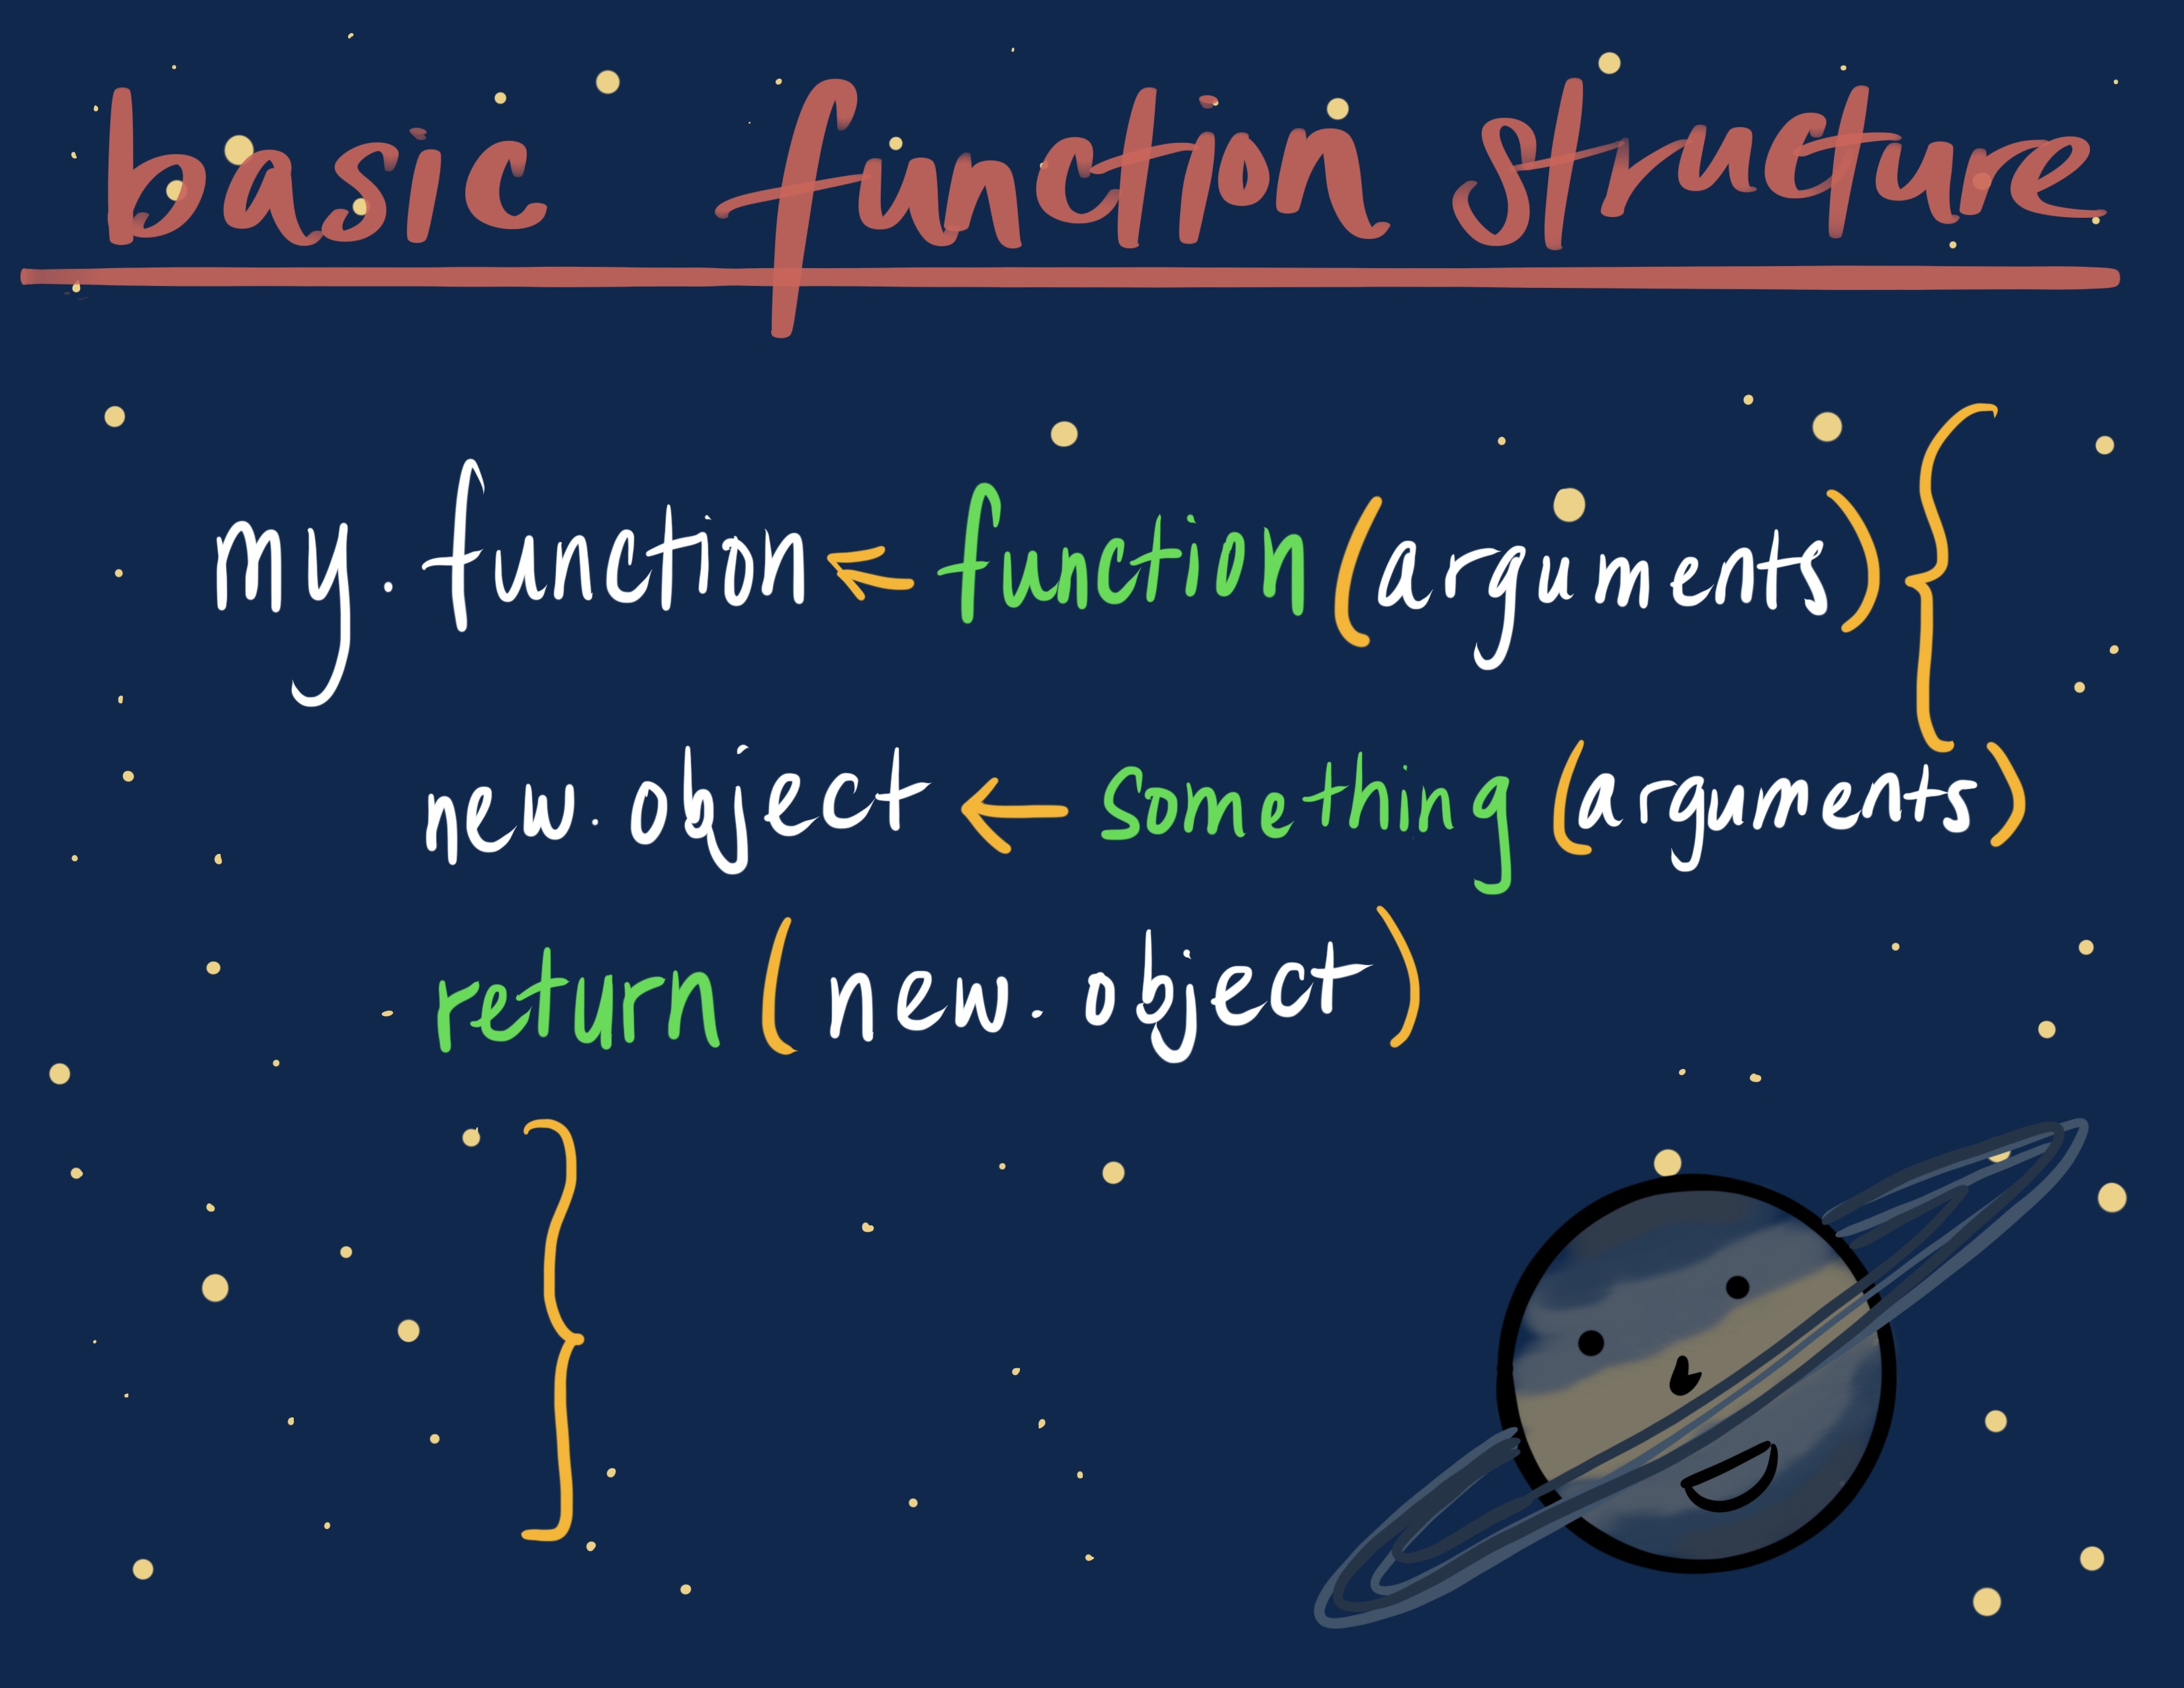 A hand-drawn function showcasing the basic expected structure. The function is named 'my.function' and takes an arguement called, 'arguments'. A 'new.object' is created by something that takes 'arguments' and retruns 'new.object' at the end. Hand-drawn stars and a smiling Saturn-shaped planet are in the background.